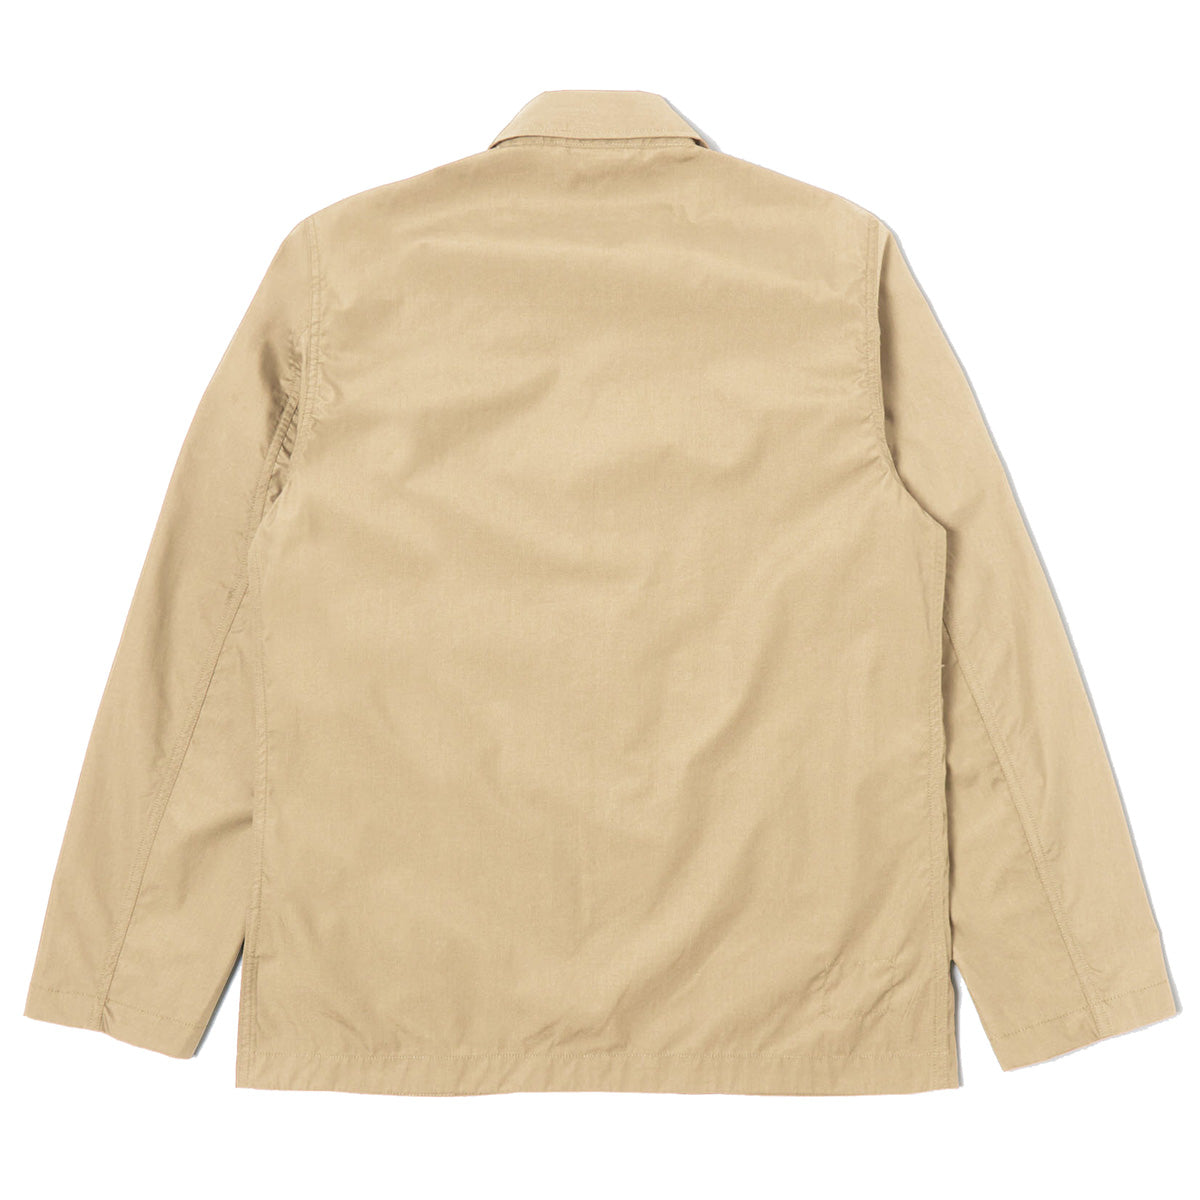 Bakers Chore Jacket - Sand Recycled Poly Tech